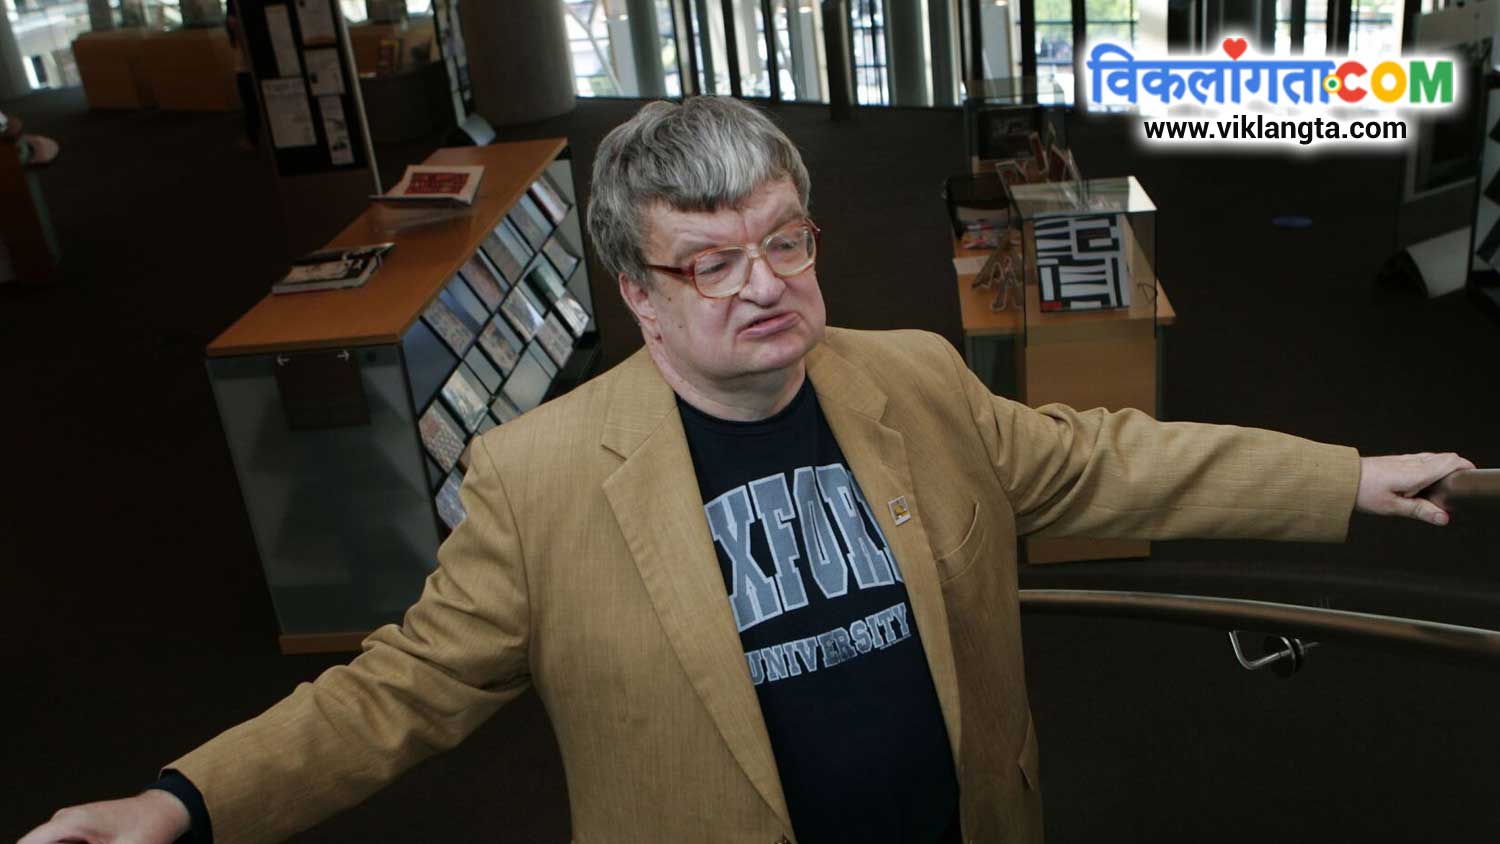 famous disabled person in the world Kim Peek